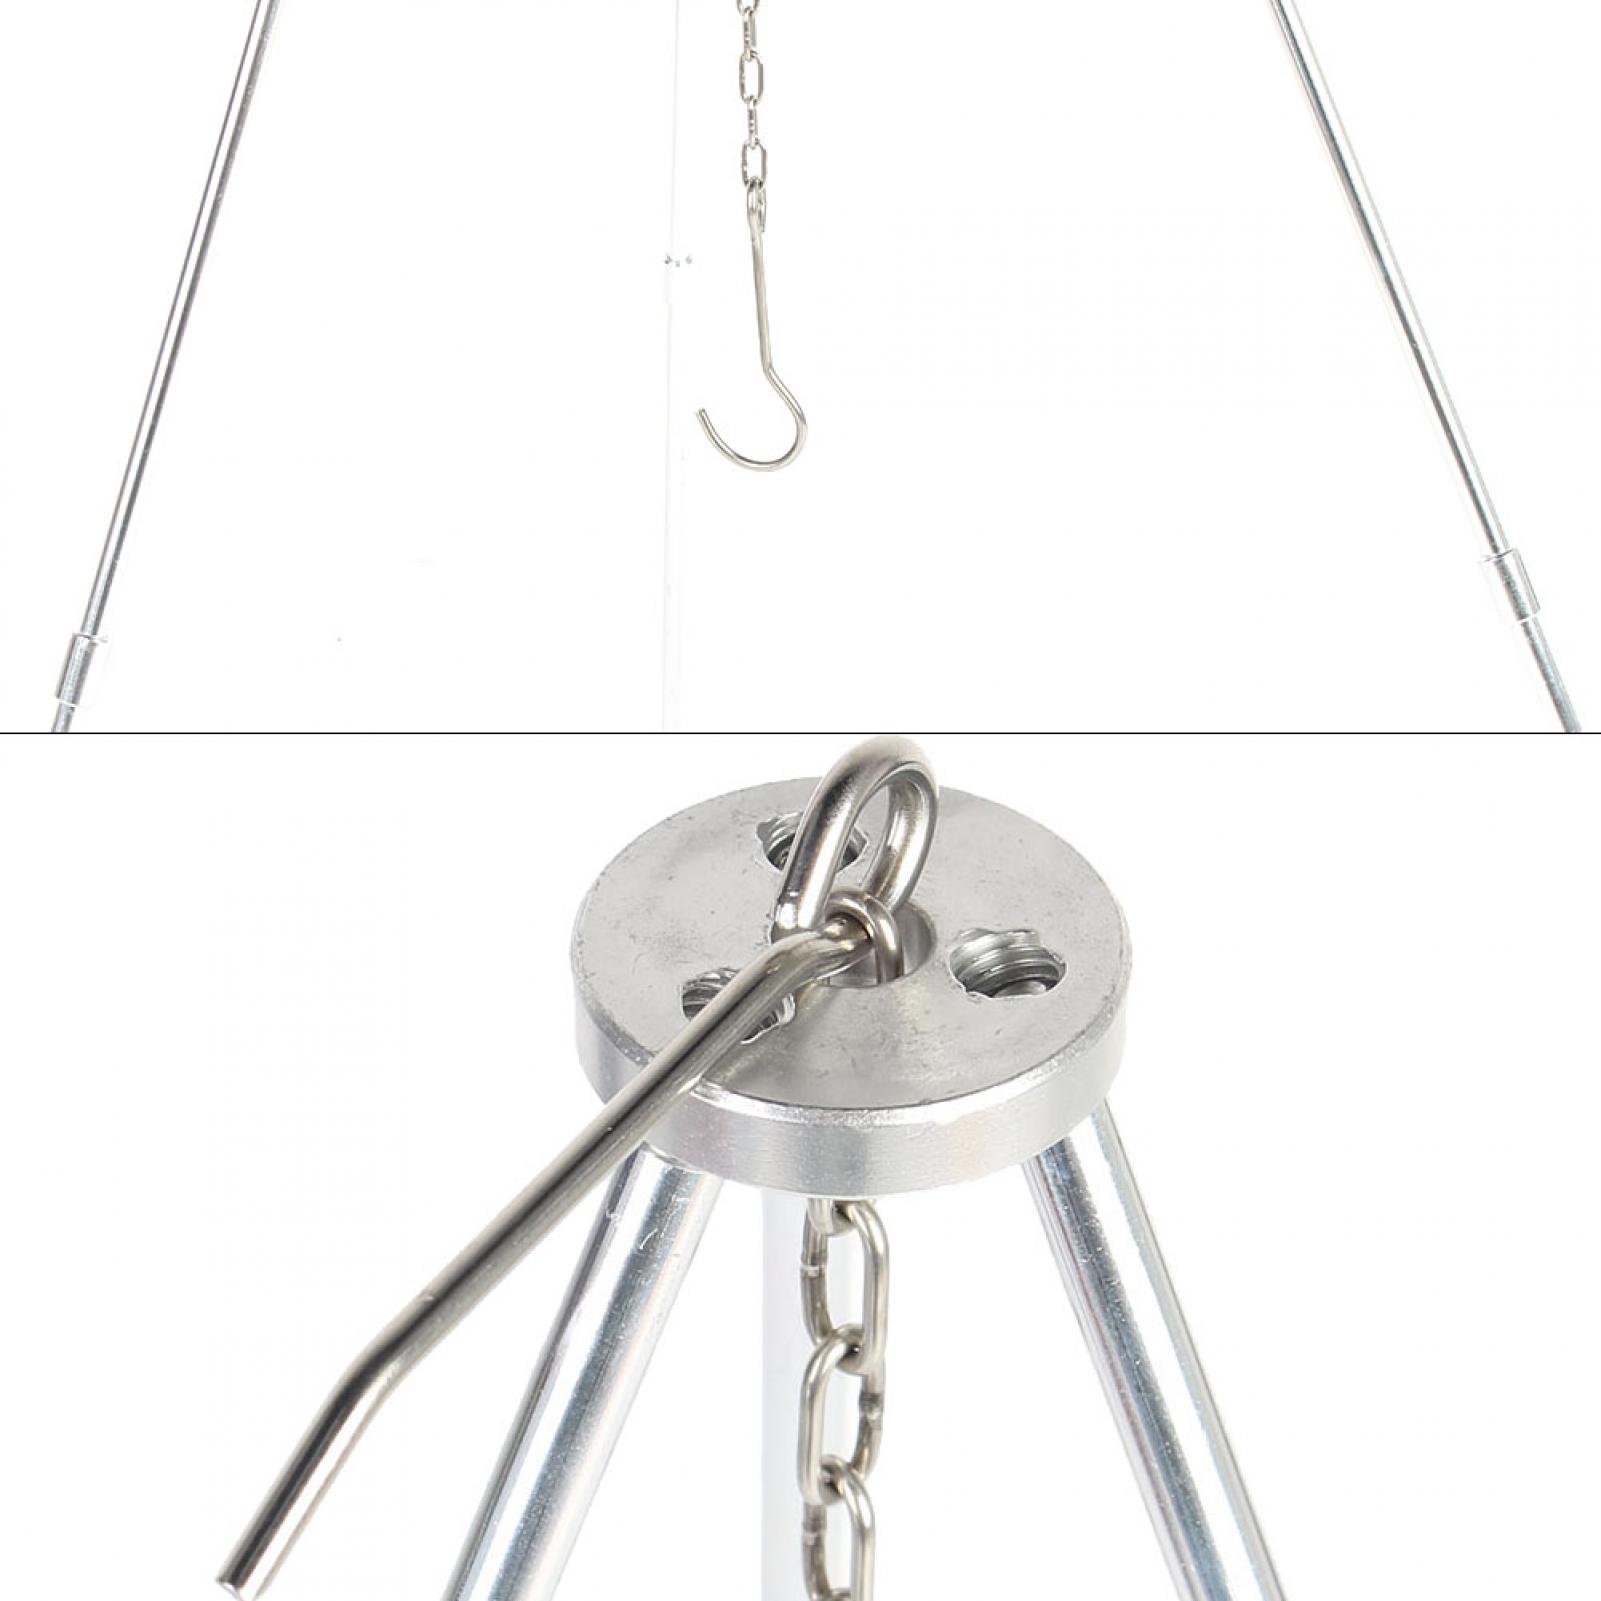 Outdoor Portable Foldable Metal Barbecue Grills Hanging Tripod Camping Picnic BBQ Cooking, Foldable Grills - image 5 of 7